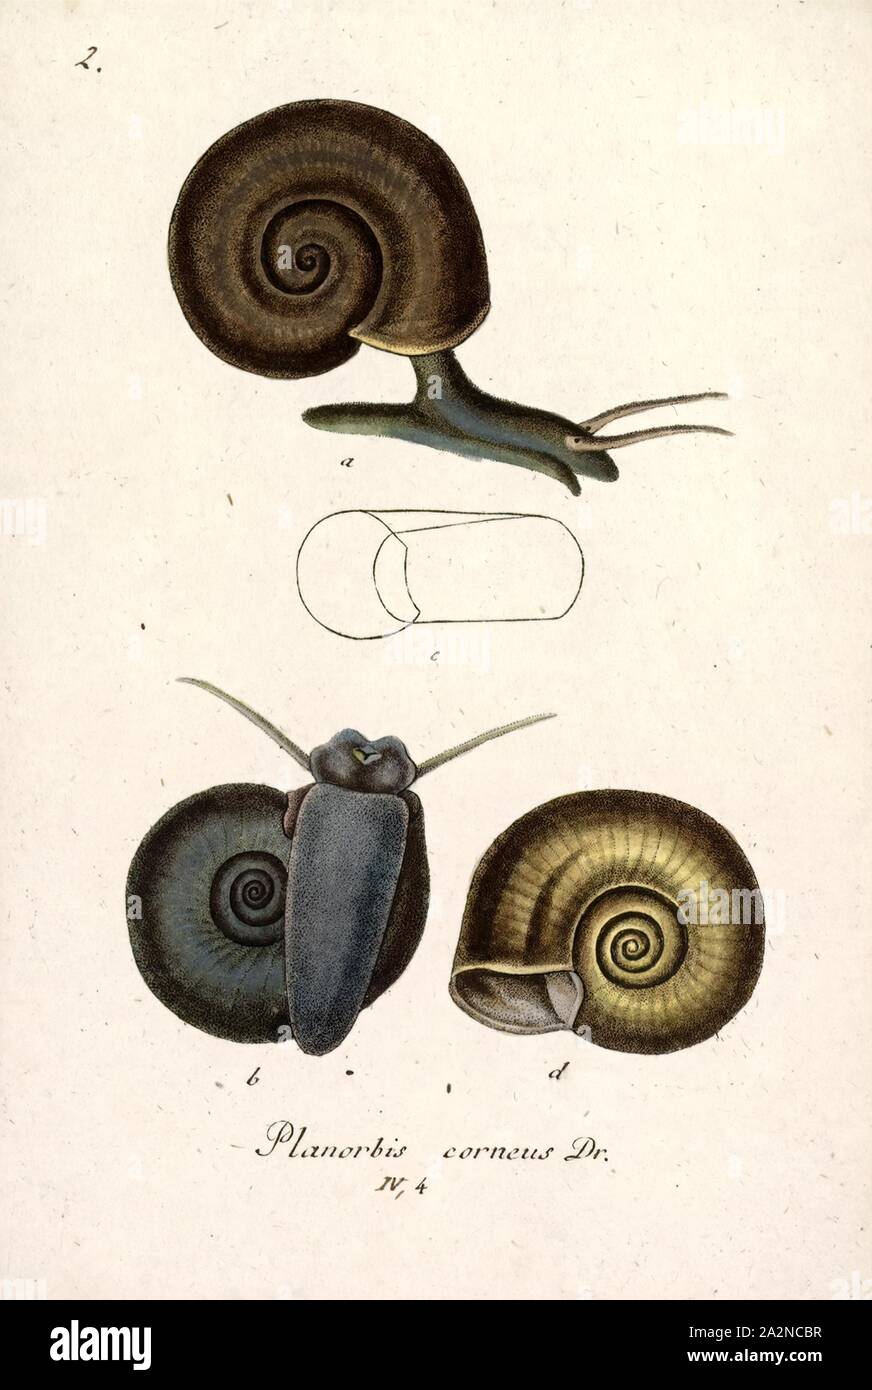 Planorbis corneus, Print, Planorbarius corneus, common name the great ramshorn, is a relatively large species of air-breathing freshwater snail, an aquatic pulmonate gastropod mollusk in the family Planorbidae, the ram's horn snails, or planorbids, which all have sinistral or left-coiling shells Stock Photo